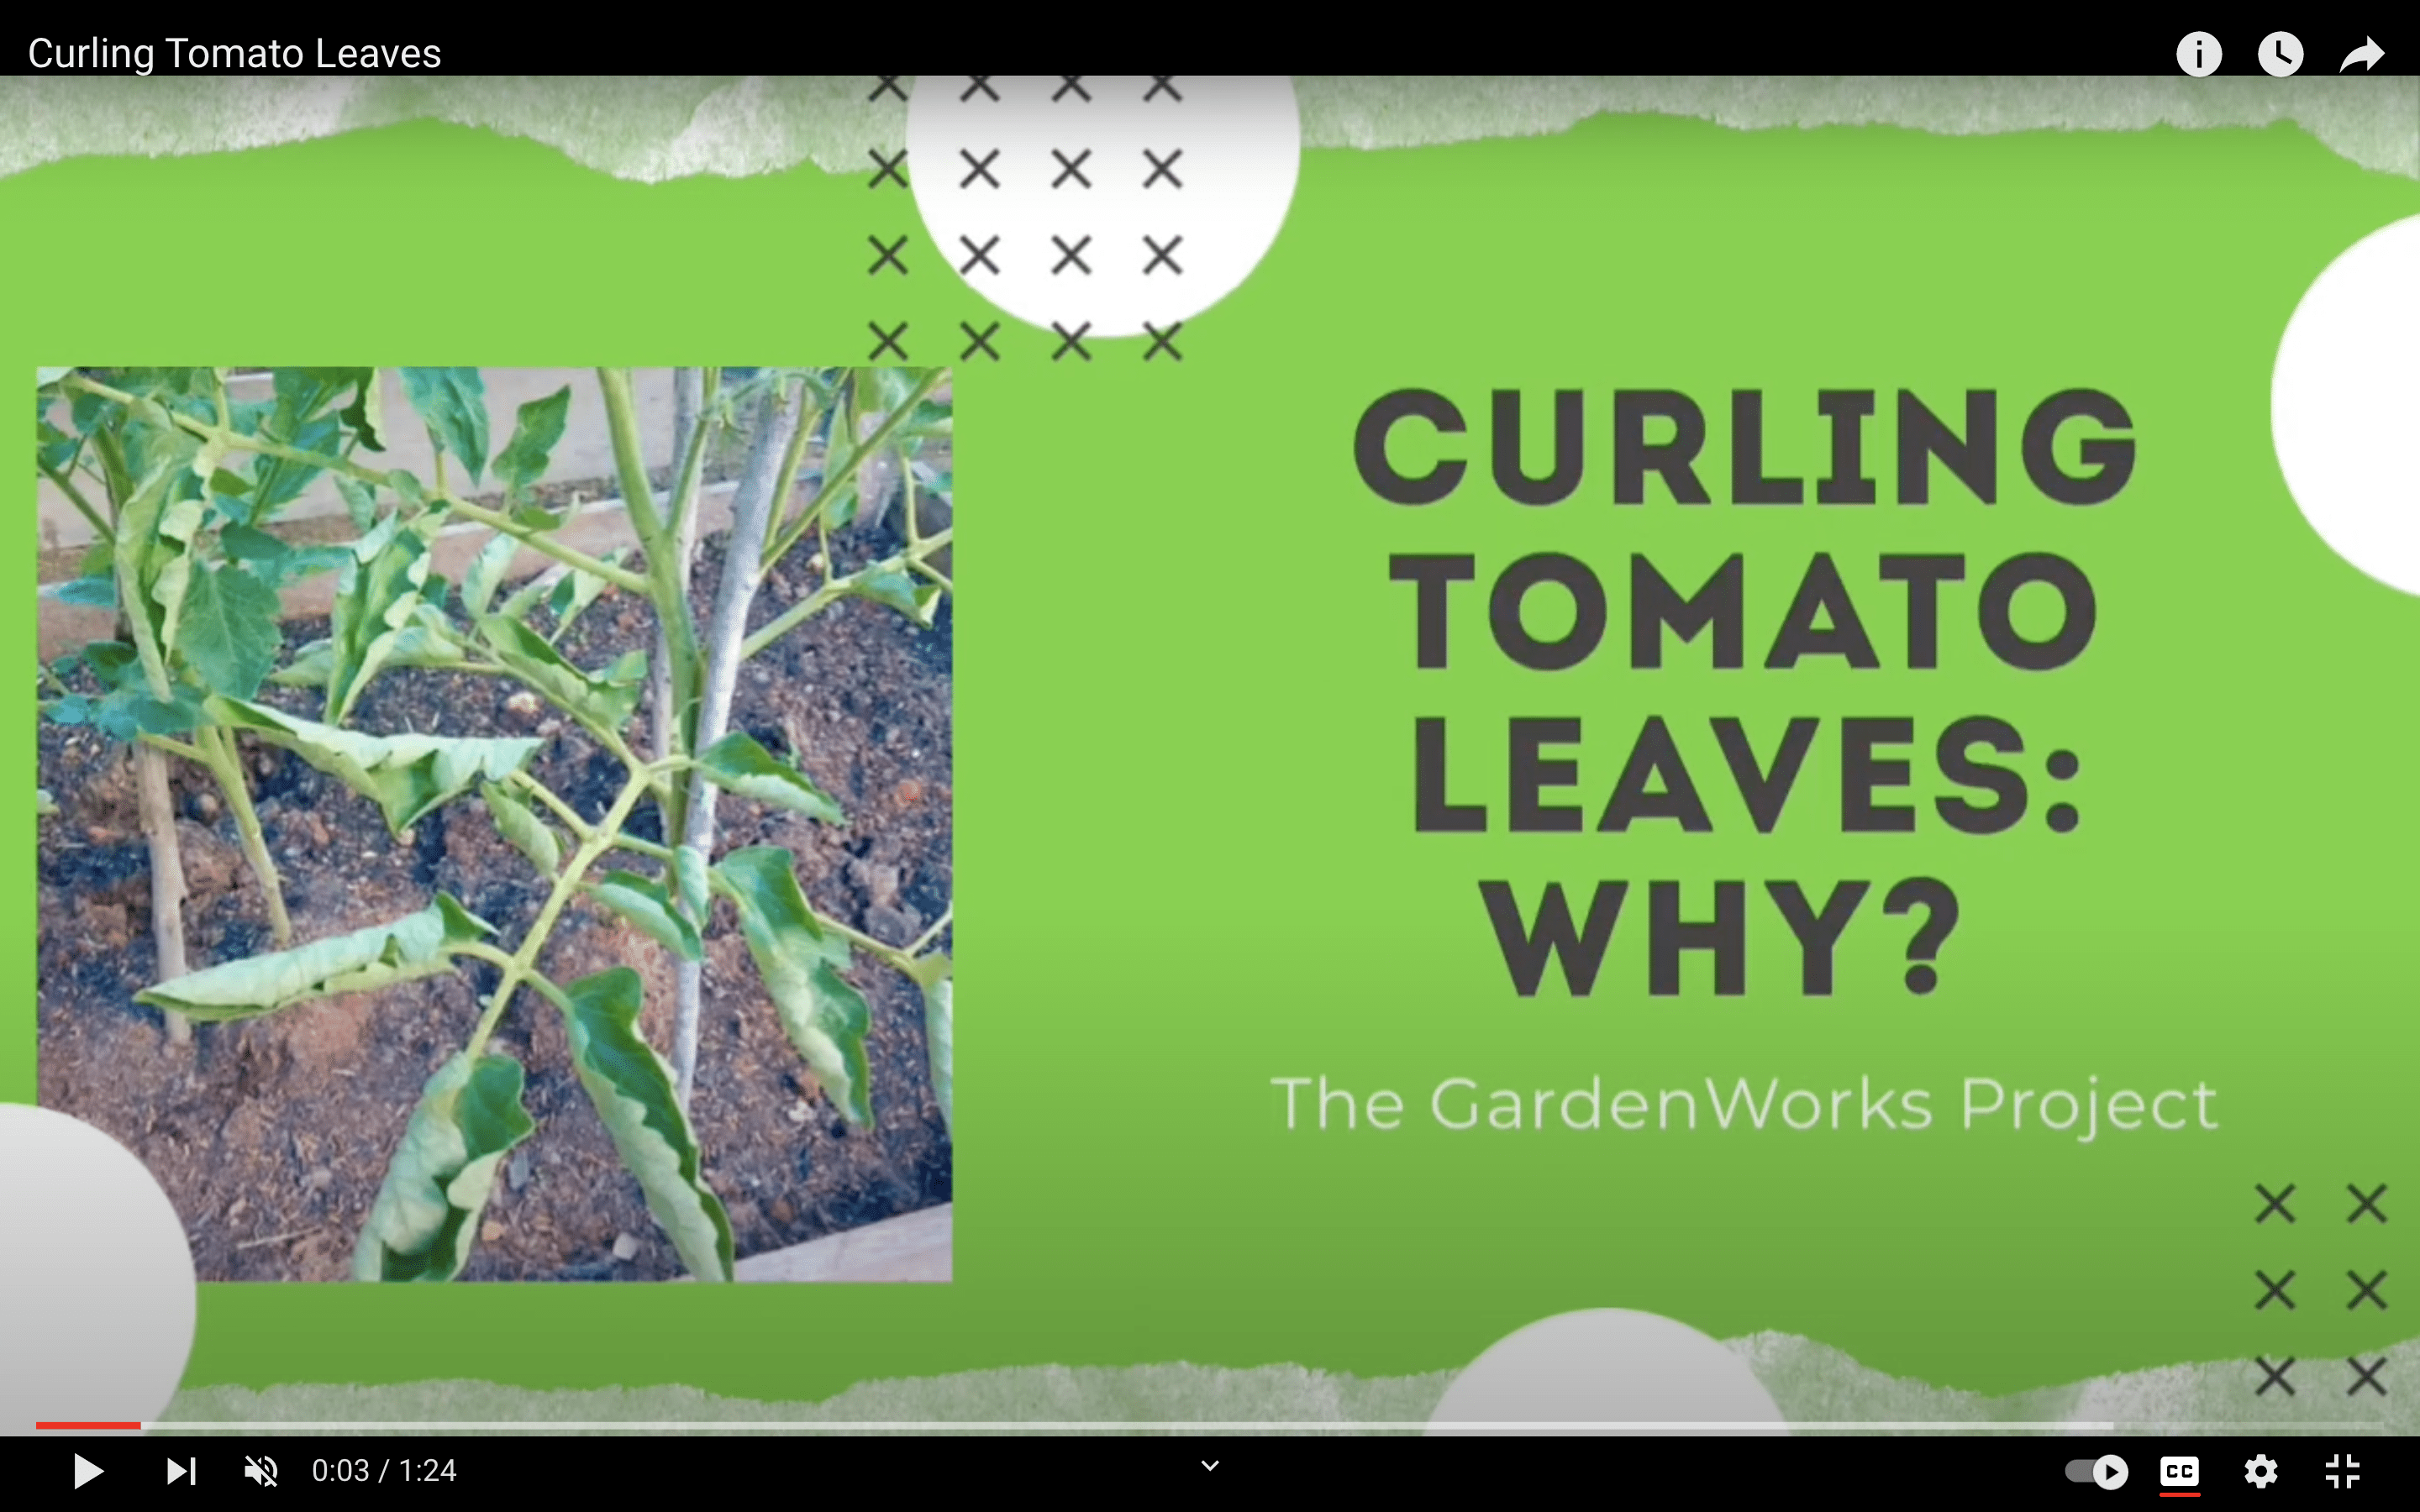 Curling Tomato Leaves